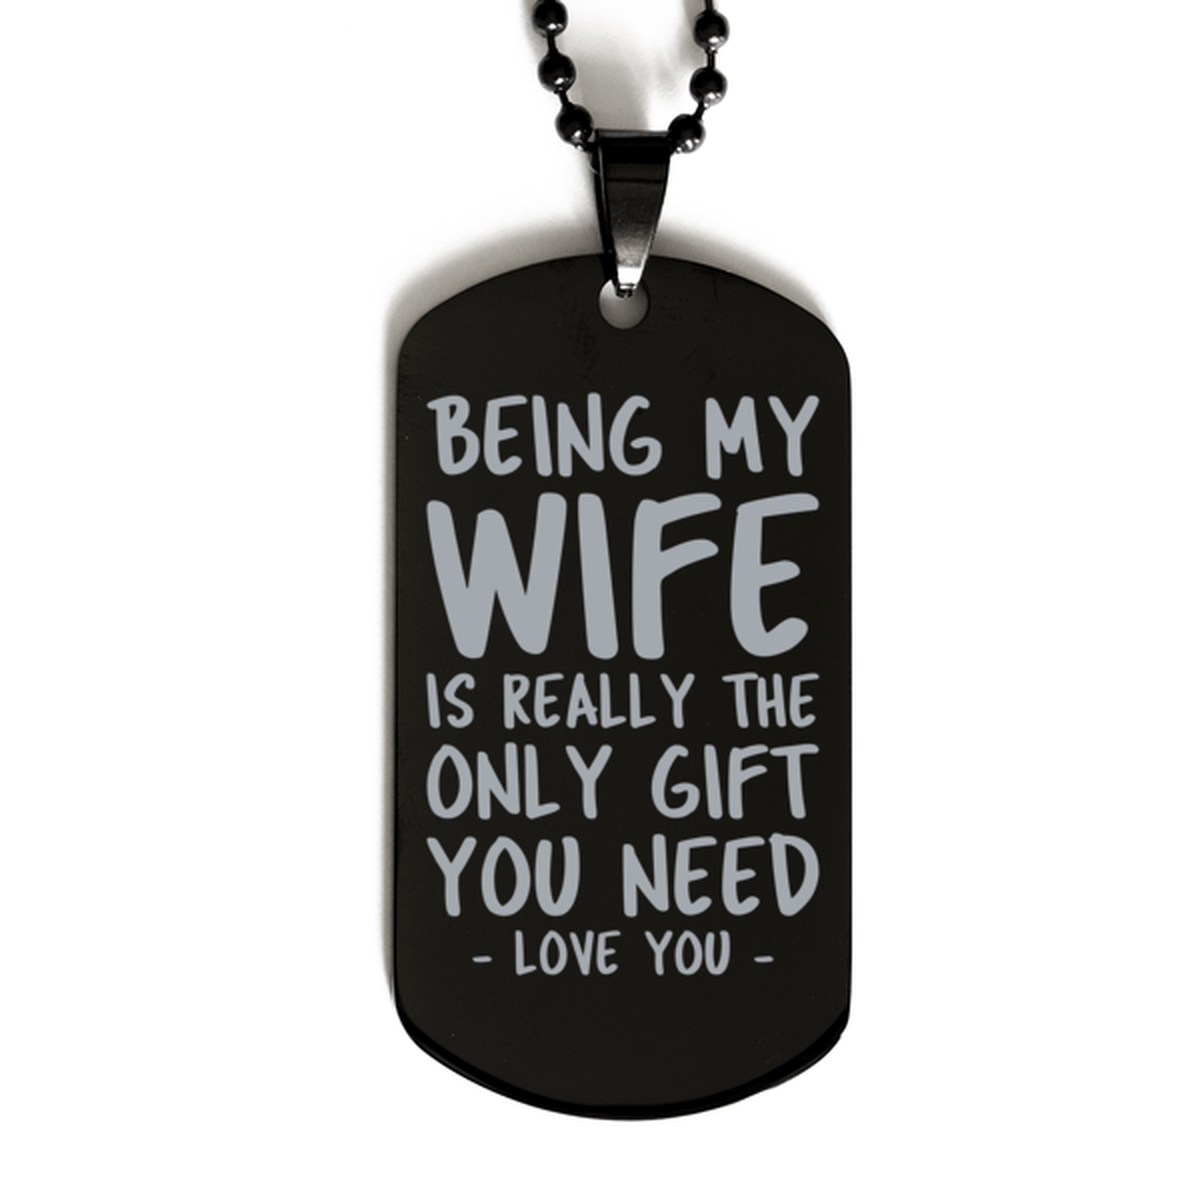 Funny Wife Black Dog Tag Necklace, Being My Wife Is Really the Only Gift You Need, Best Birthday Gifts for Wife